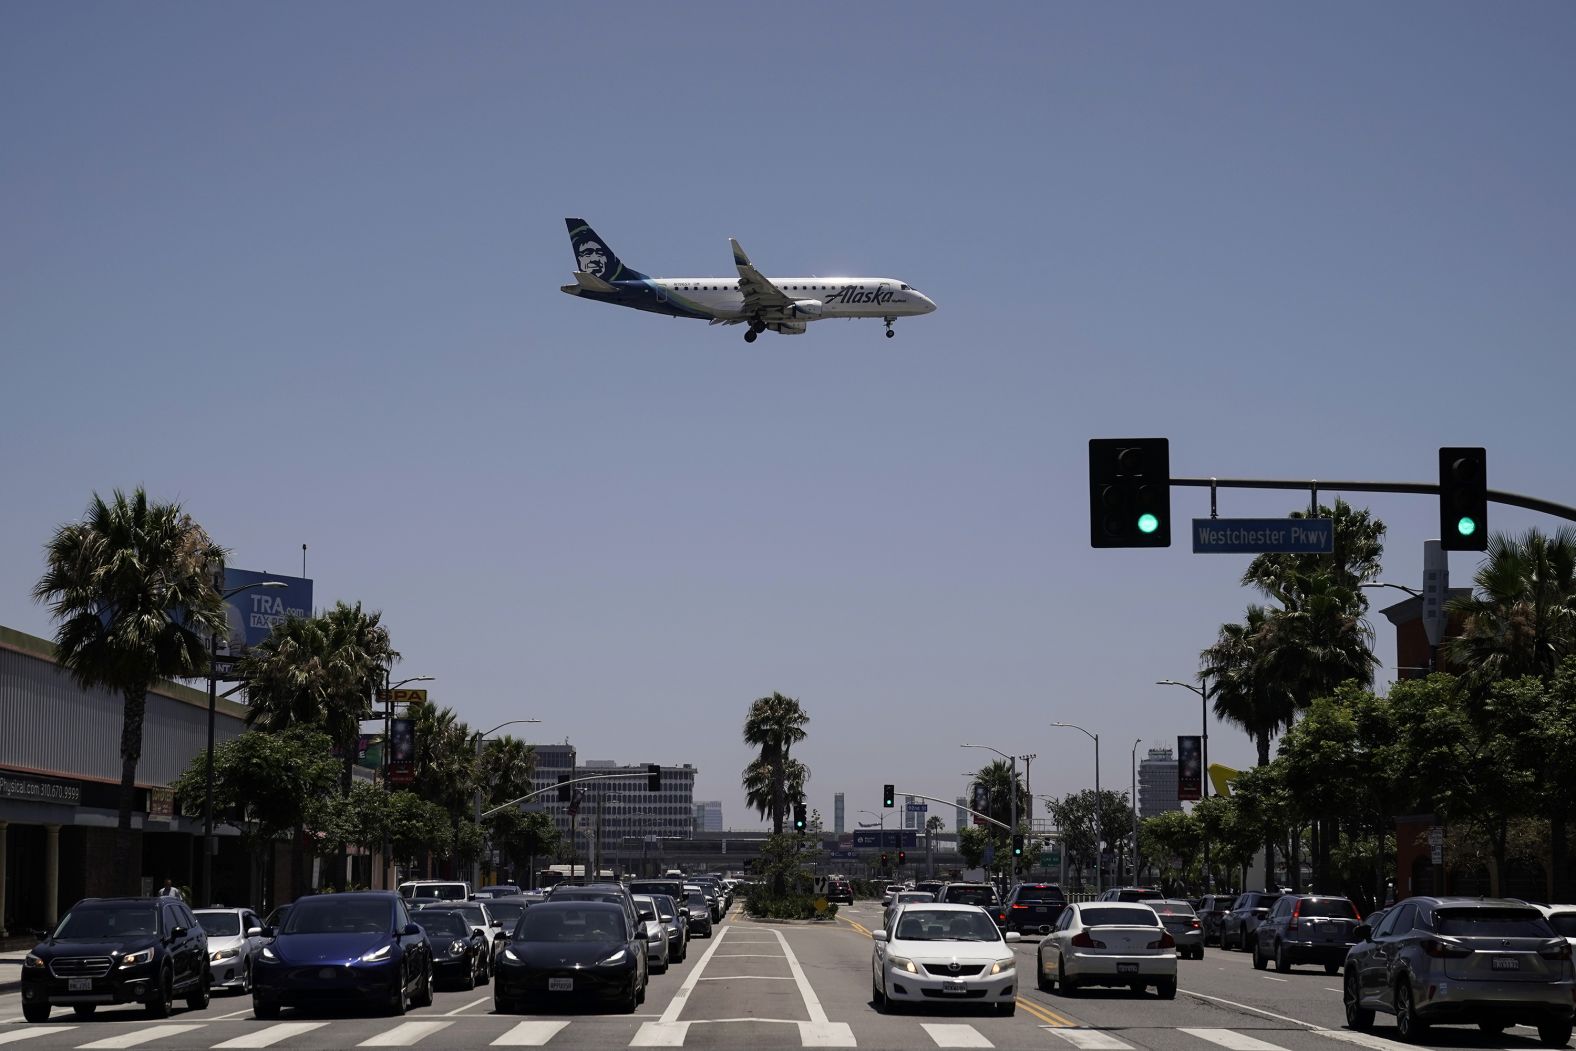 An Alaska Airlines passenger jet prepares to land at the Los Angeles International Airport on Friday. The Fourth of July holiday weekend got off to a booming start with airport crowds crushing the numbers seen in 2019.